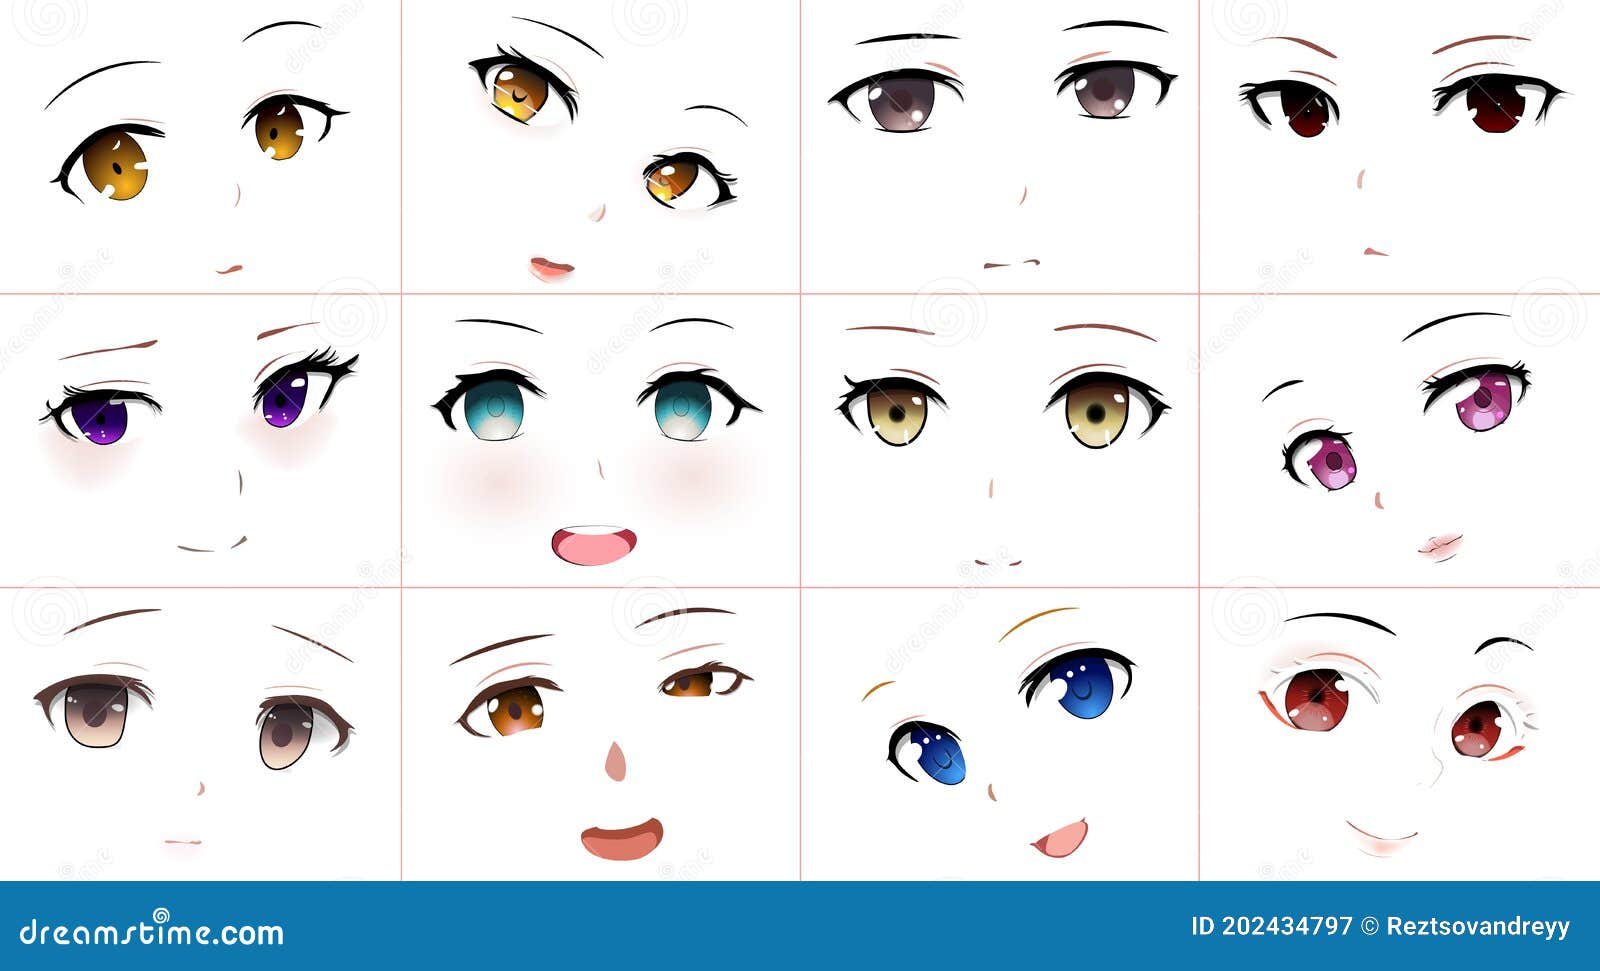 Twitter 上的CrymsieHey everyone Here is a simple anime eye tutorial  This how I draw basic anime eyes and feel free to follow along and add your  personal flare D I can